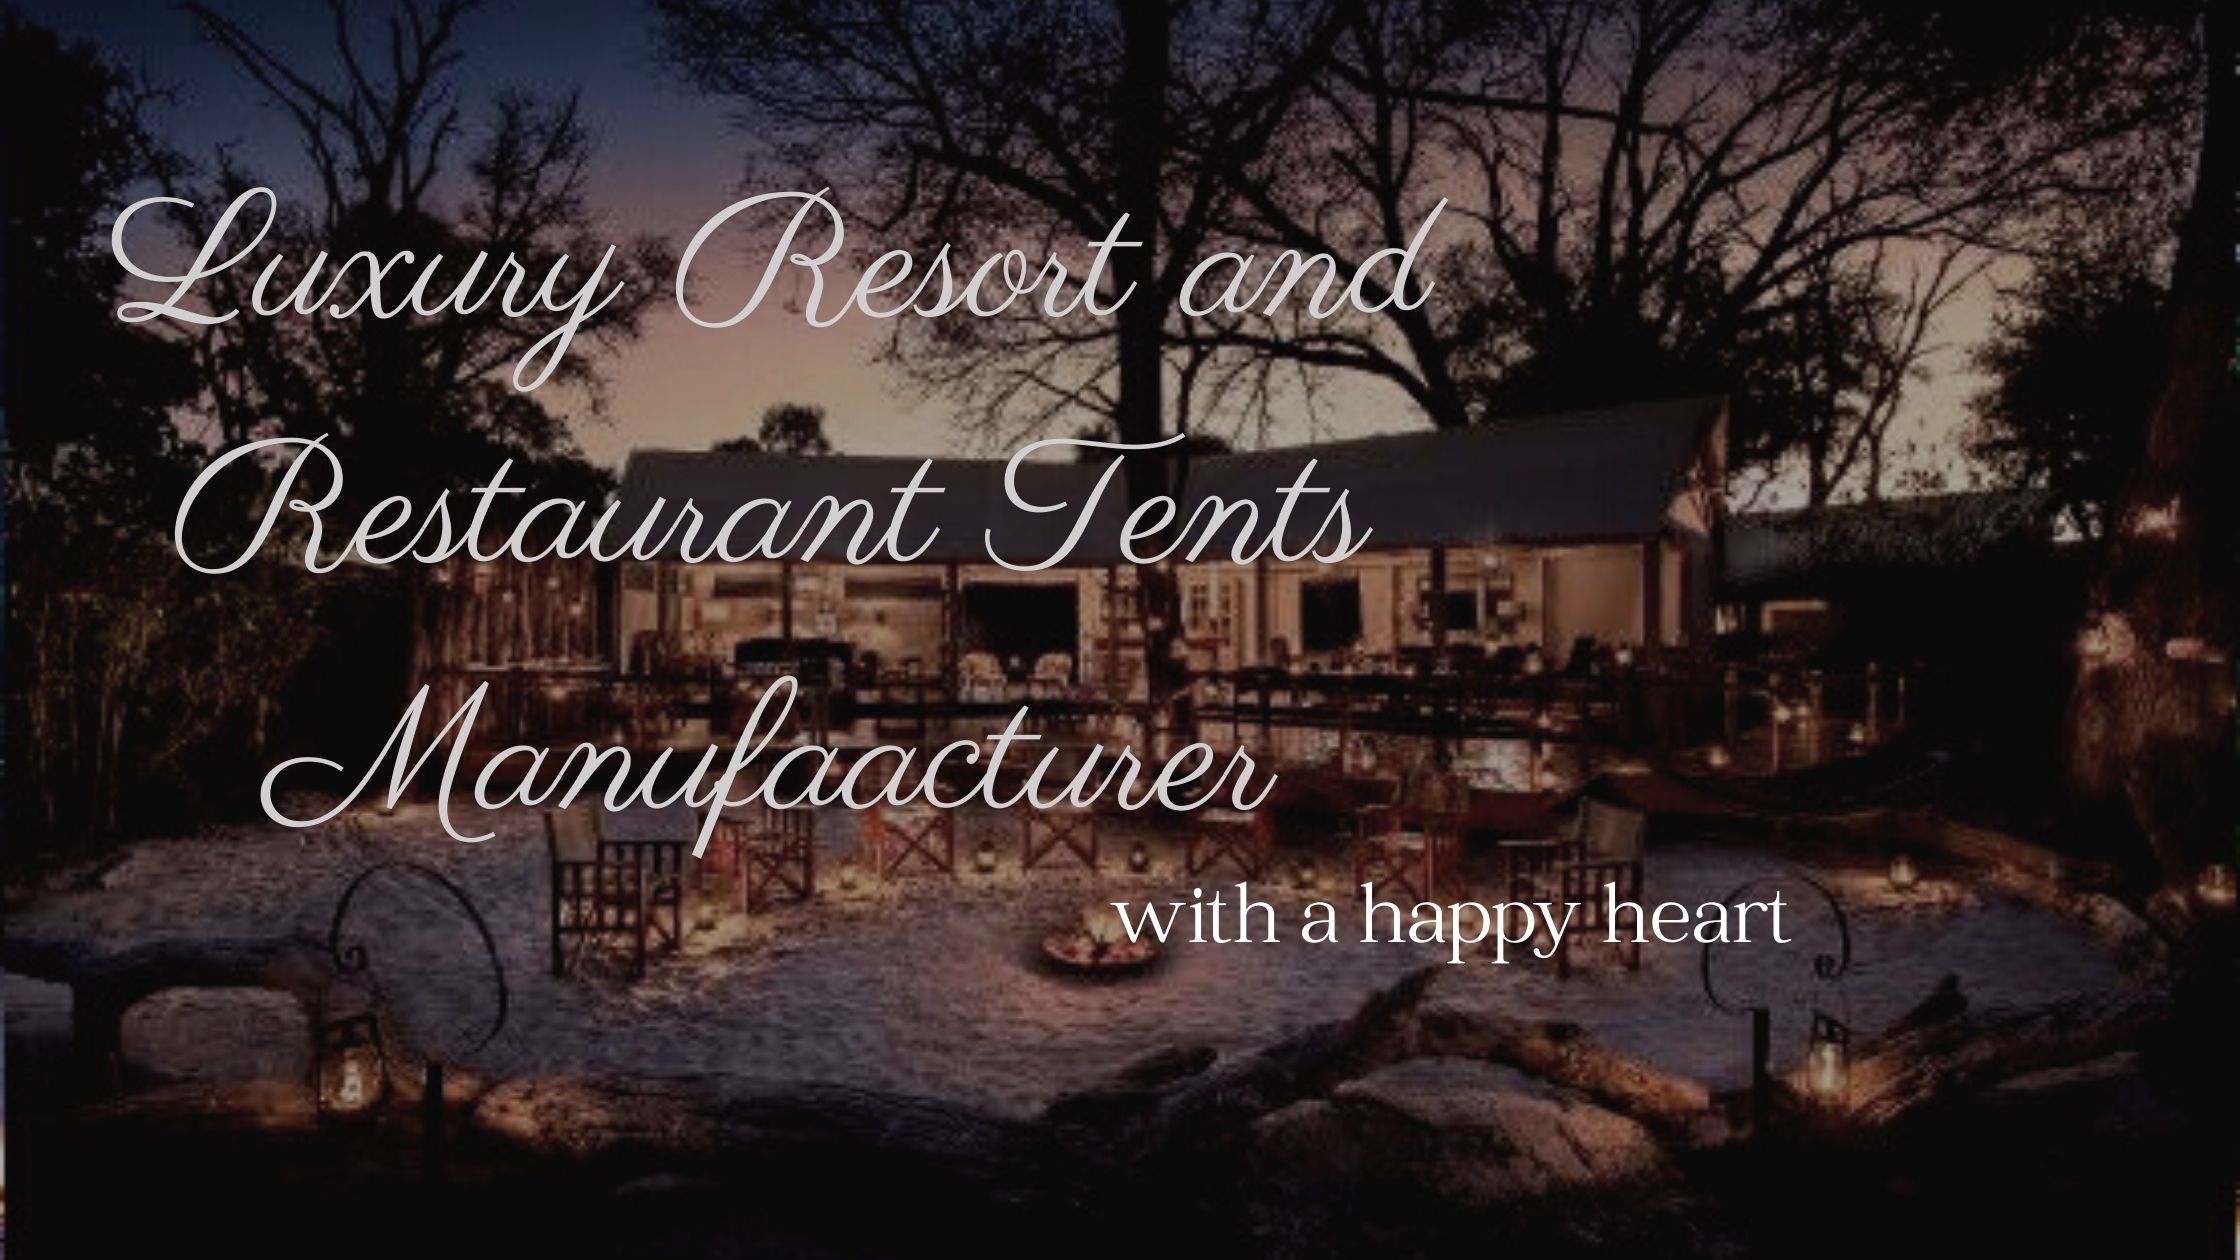 Luxury Resort and Restaurant Tents Manufacturer - Glamping Tents